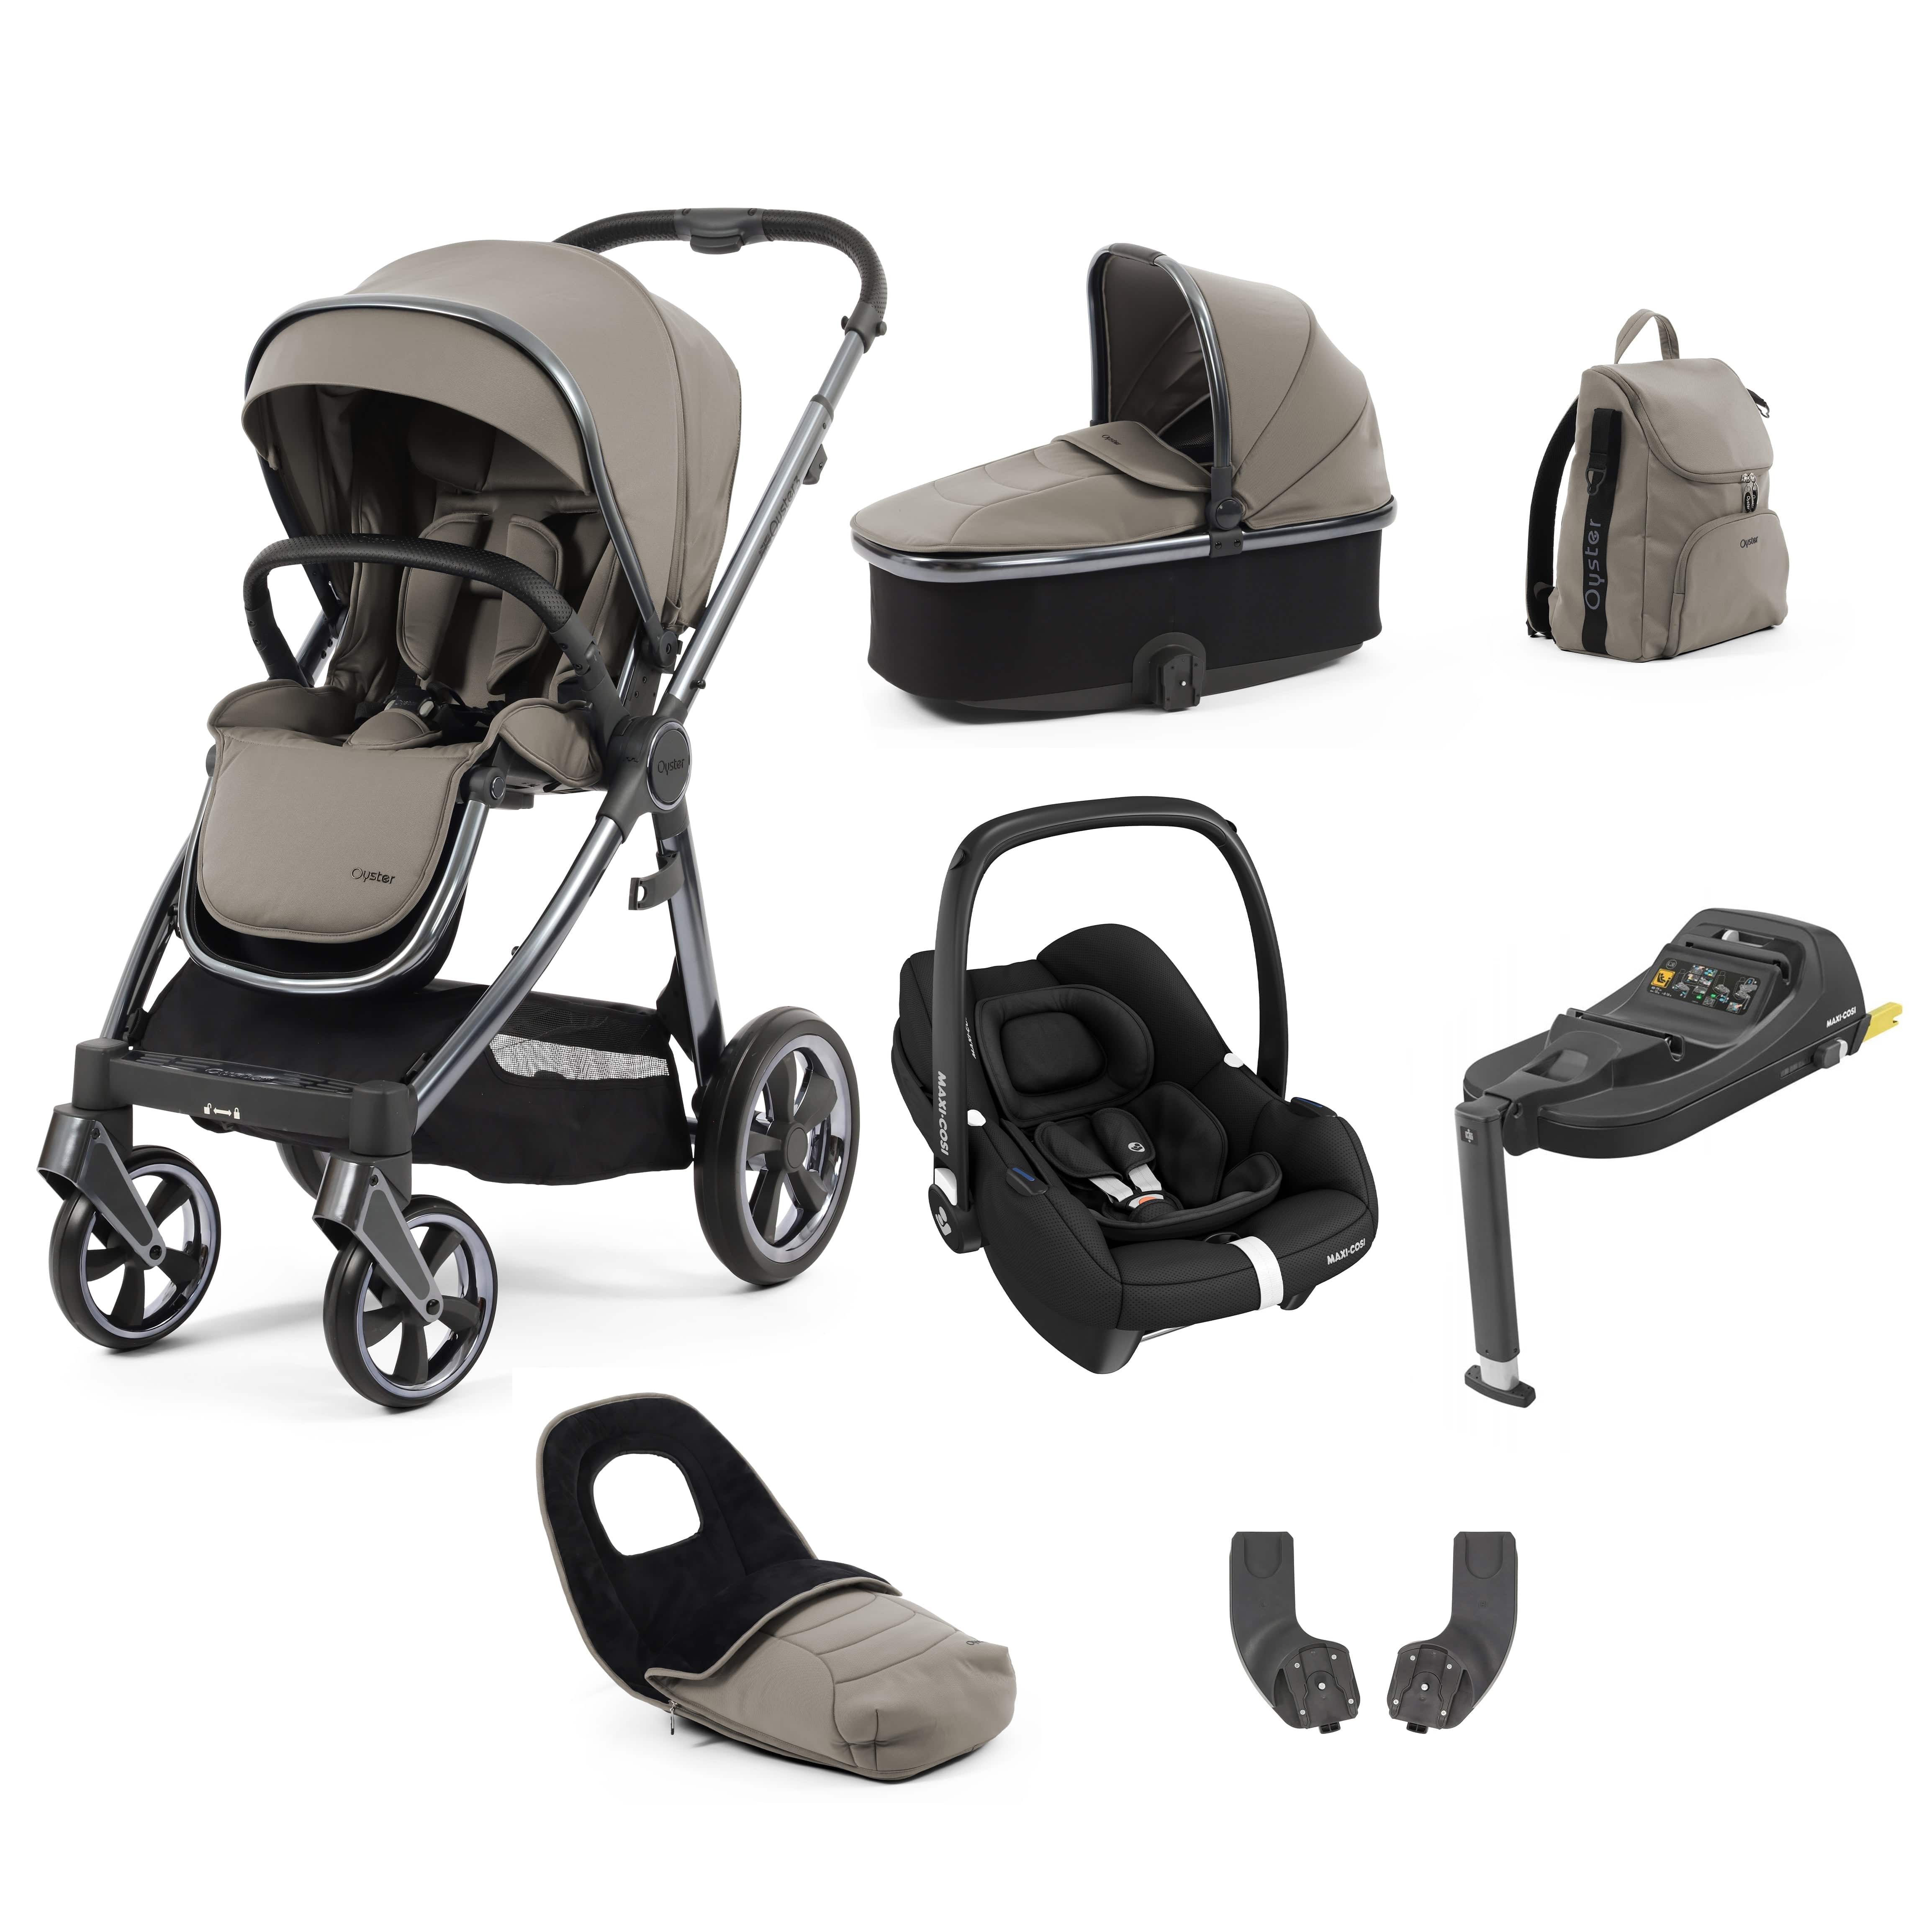 Babystyle Oyster 3 Luxury 7 Piece with Car Seat Bundle in Stone Travel Systems 14816-STN 5060711567259